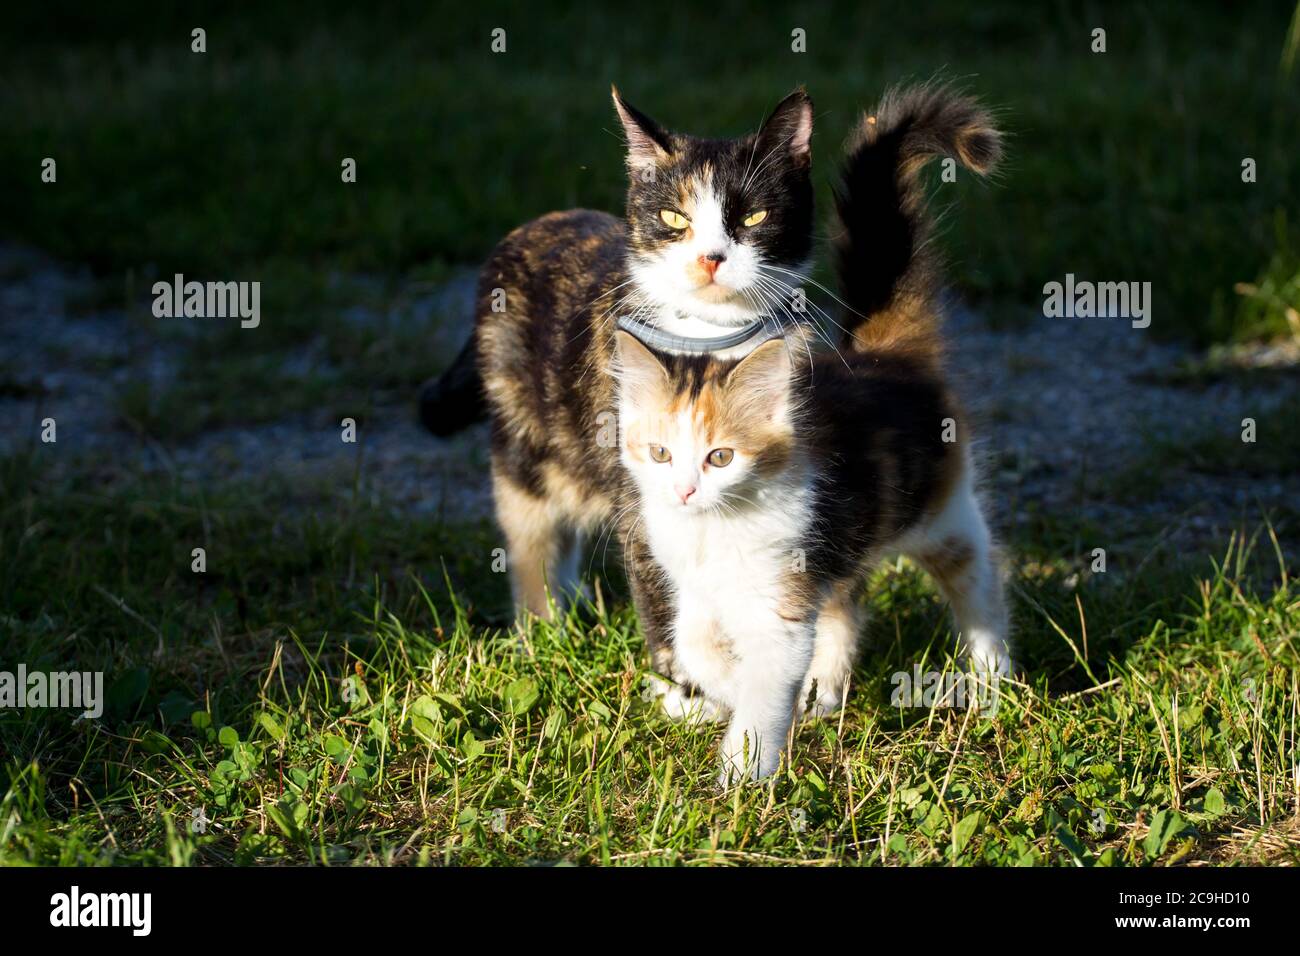 Farm cats, a mother and her kitten Stock Photo